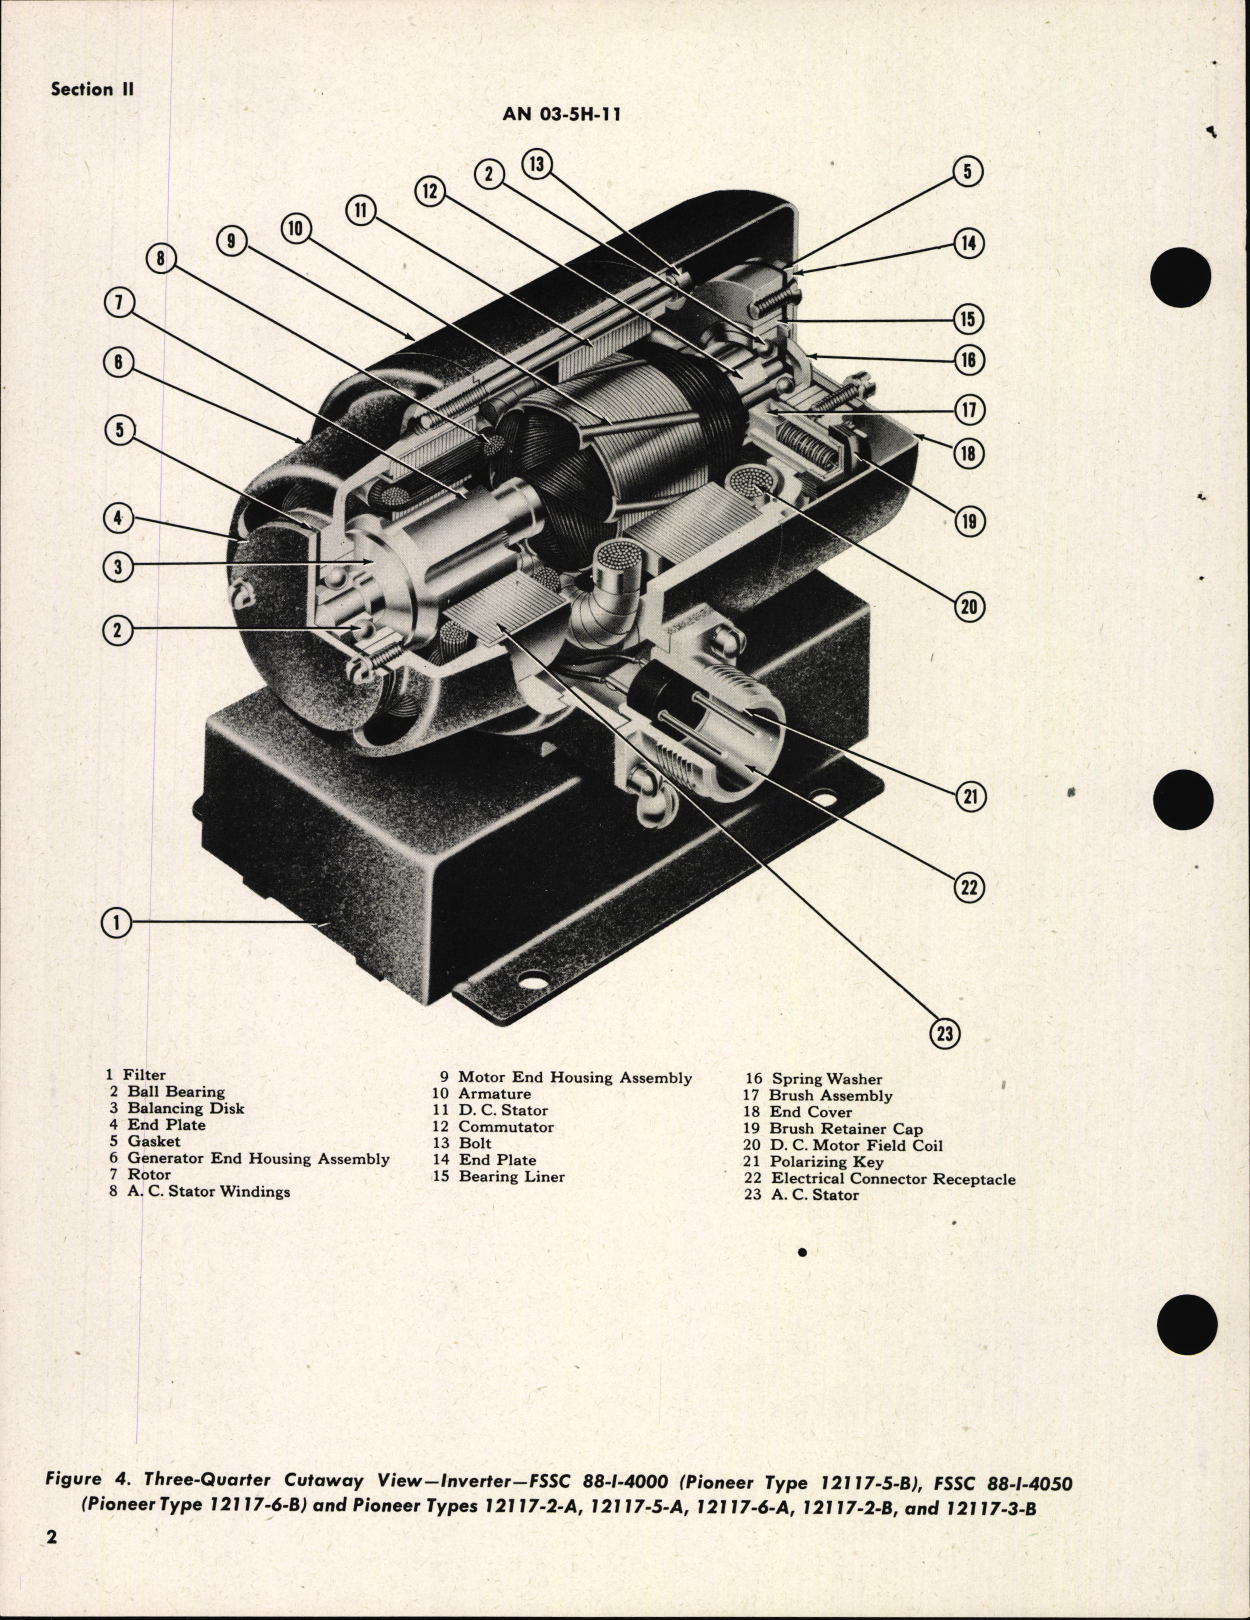 Sample page 8 from AirCorps Library document: Operation, Service & Overhaul Instructions with Parts Catalog for Inverters